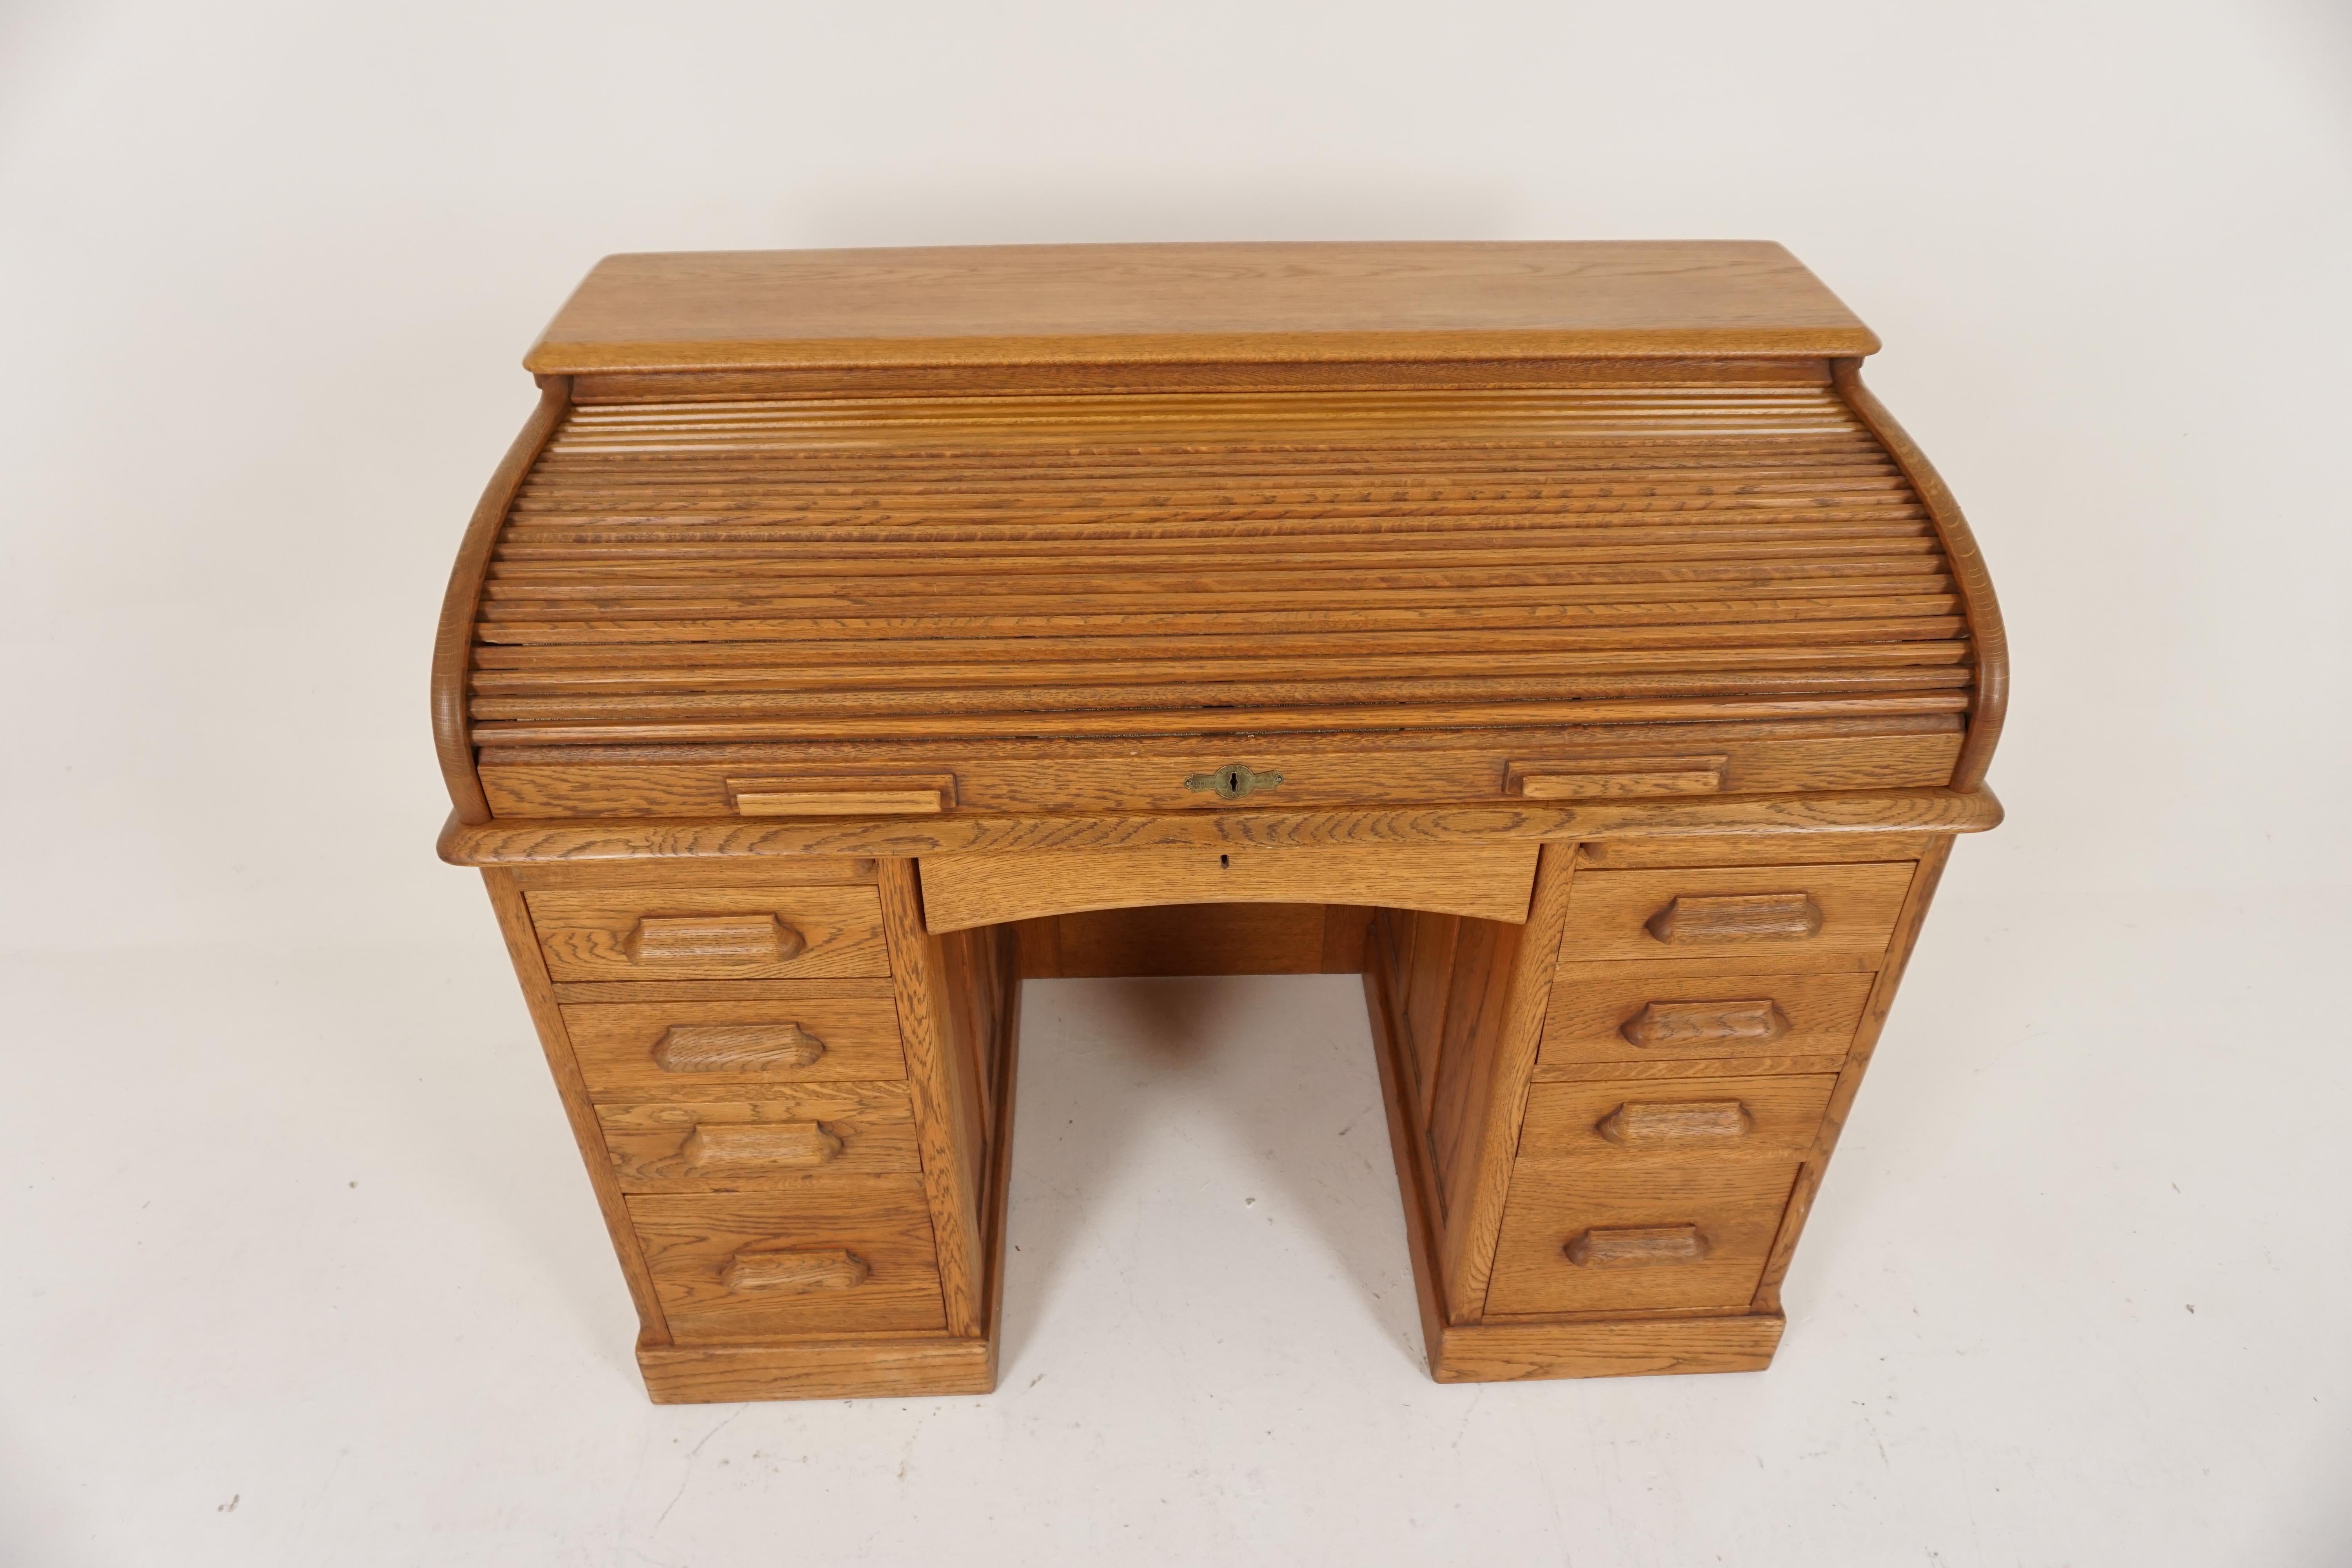 Antique oak desk, double pedestal D-end, roll top desk, England 1900, B2075

England 1900
Solid oak
Refinished 30 years ago
Rectangular top
Smooth running
Fitted with pigeon holes, drawers and pen holders
Note two pull out drawers are